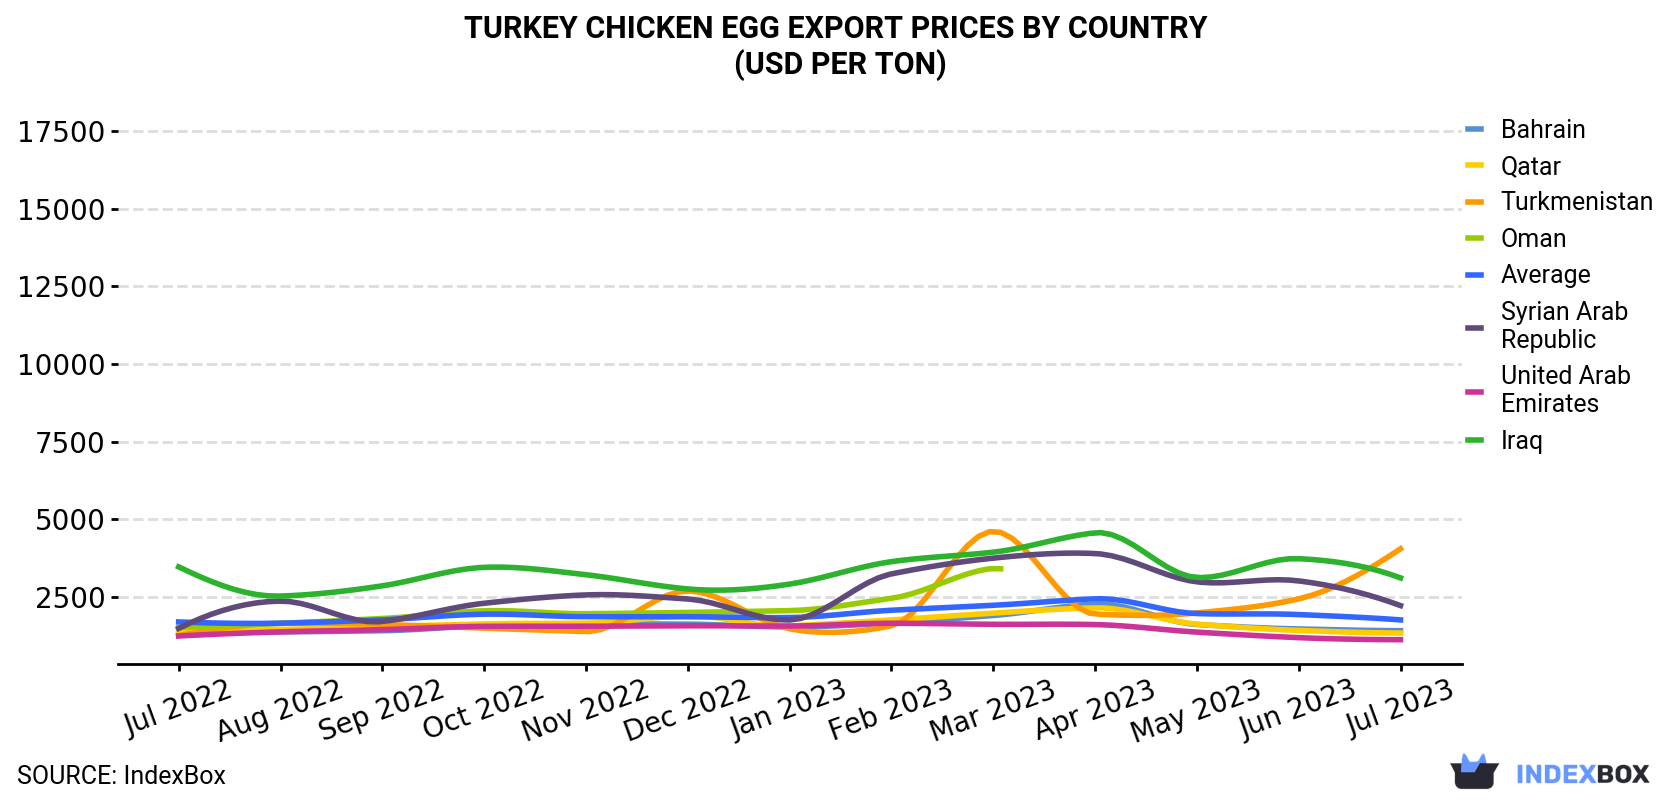 Turkey Chicken Egg Export Prices By Country (USD Per Ton)